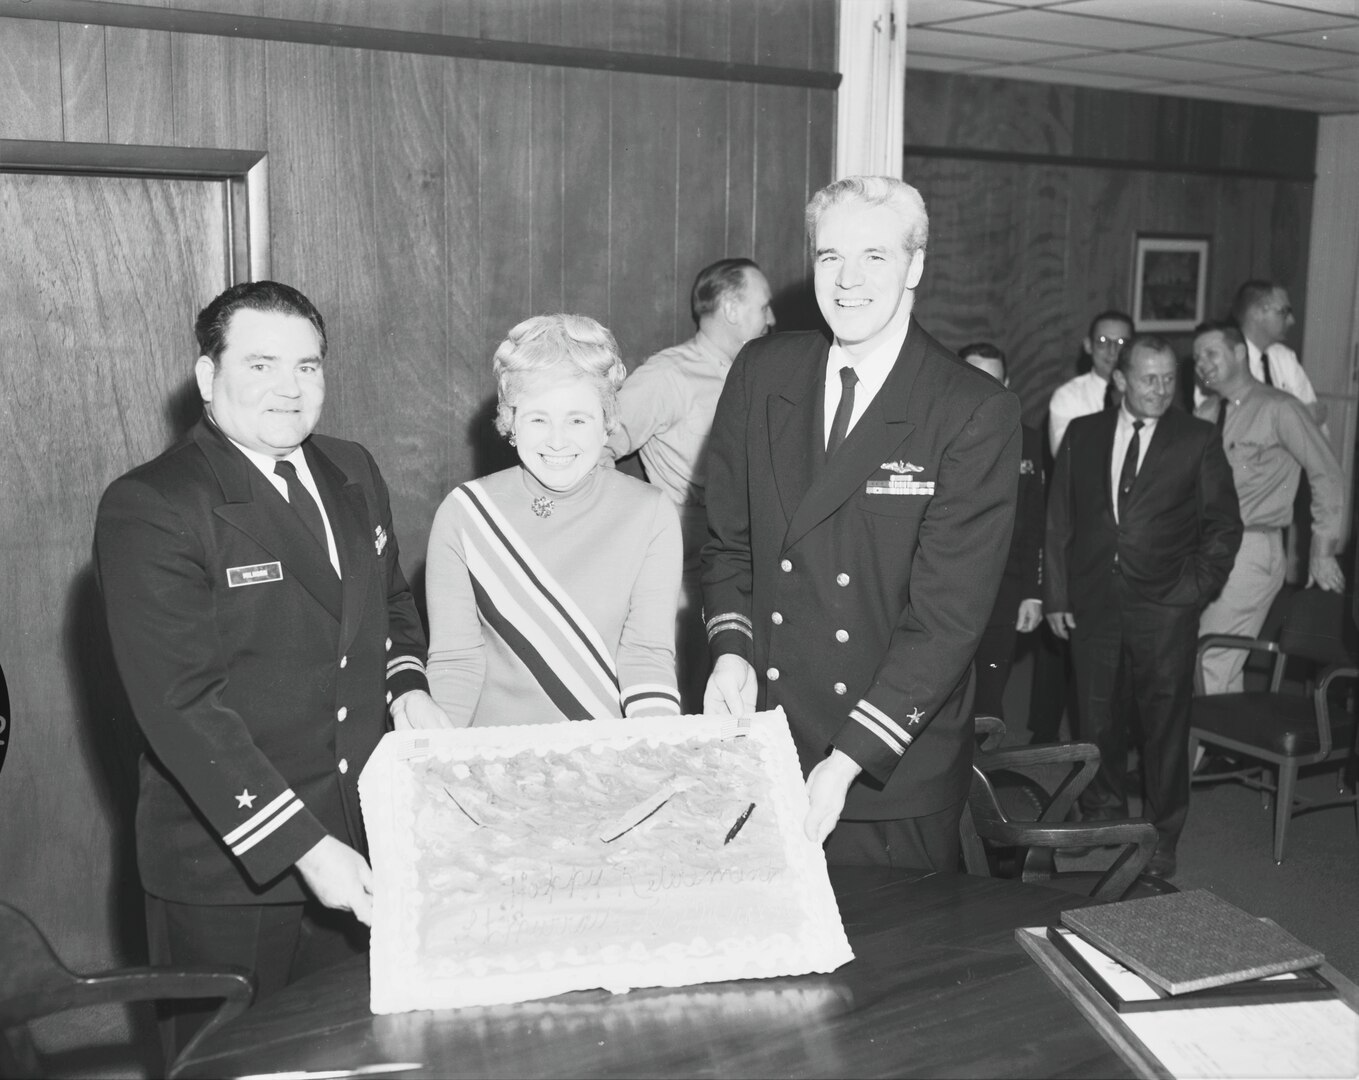 Lt. Milhorn Retirement: A Service to the Fleet historic photograph shows Lt. Harvey H. Milhorn (left) and Lt. Arthur P. Murray (right), former ships superintendents at Norfolk Naval Shipyard (NNSY), displaying a cake presented to them following their retirement ceremony in February 1970.